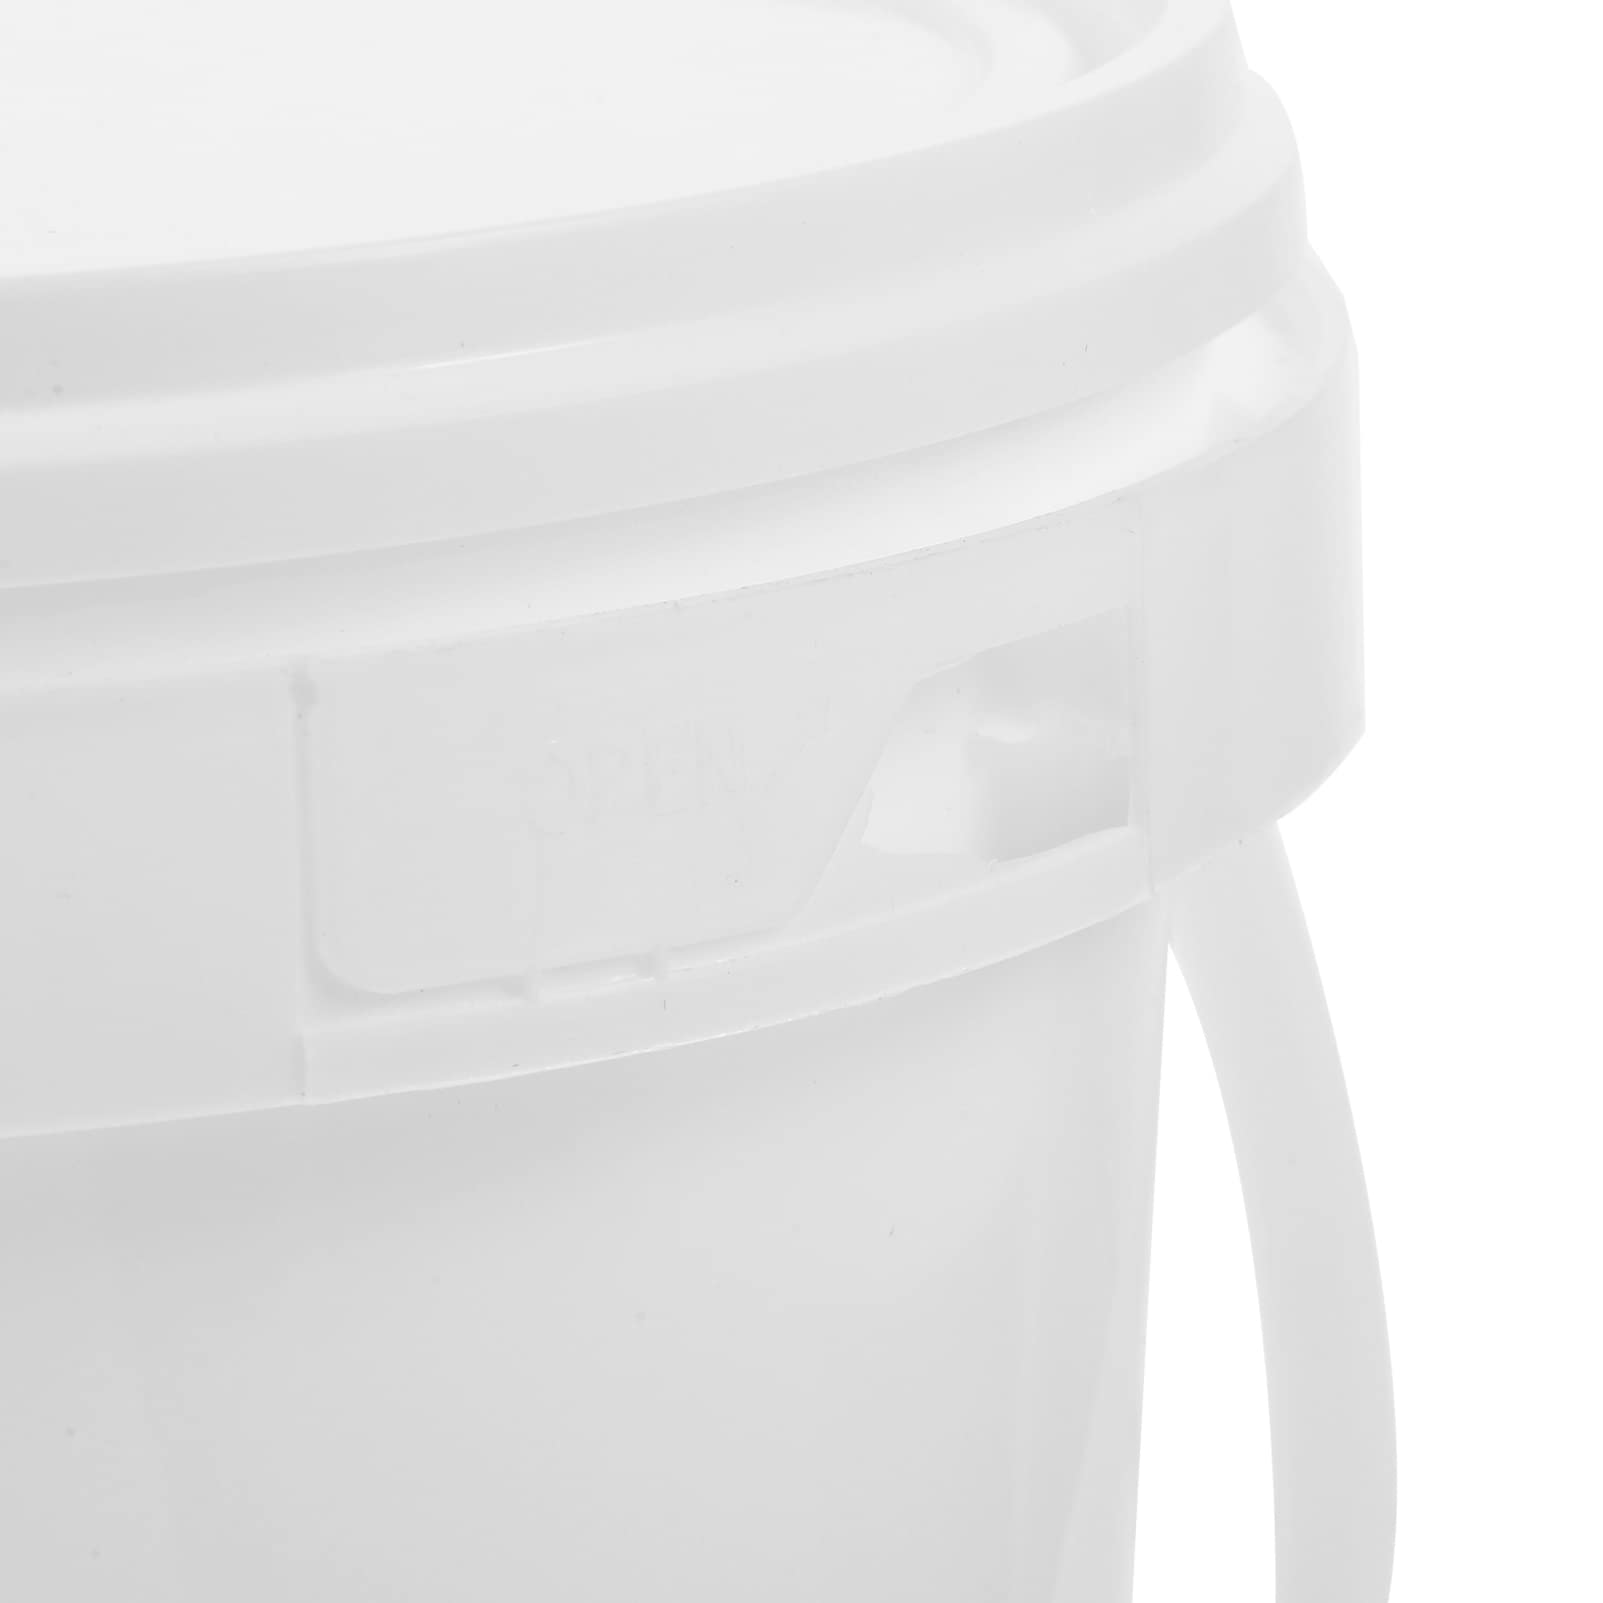 Zerodeko White Plastic Bucket with Handle Lid 2pcs 2L Ice Cream Tub Heavy Duty Portable All Pail Bucket Container for Food Treasure